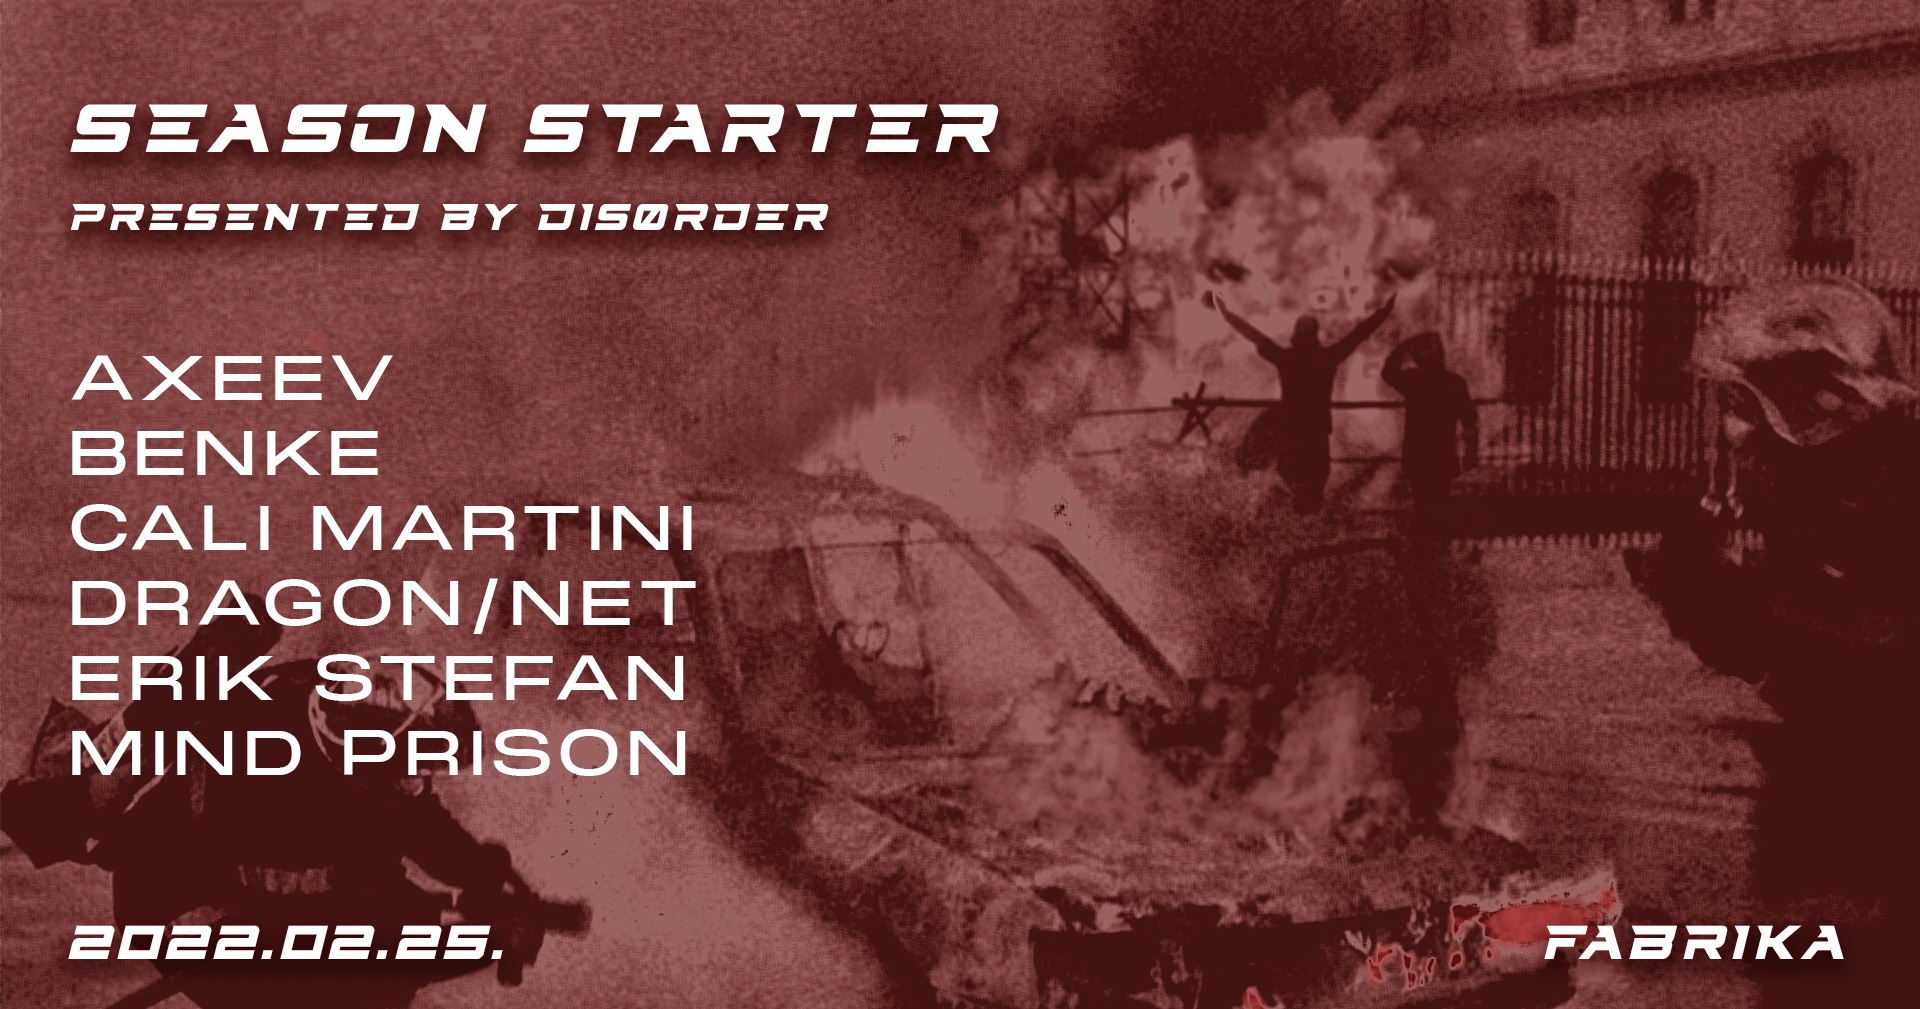 (CANCELED) Disorder - Season Starter Rave + Afterparty - フライヤー表